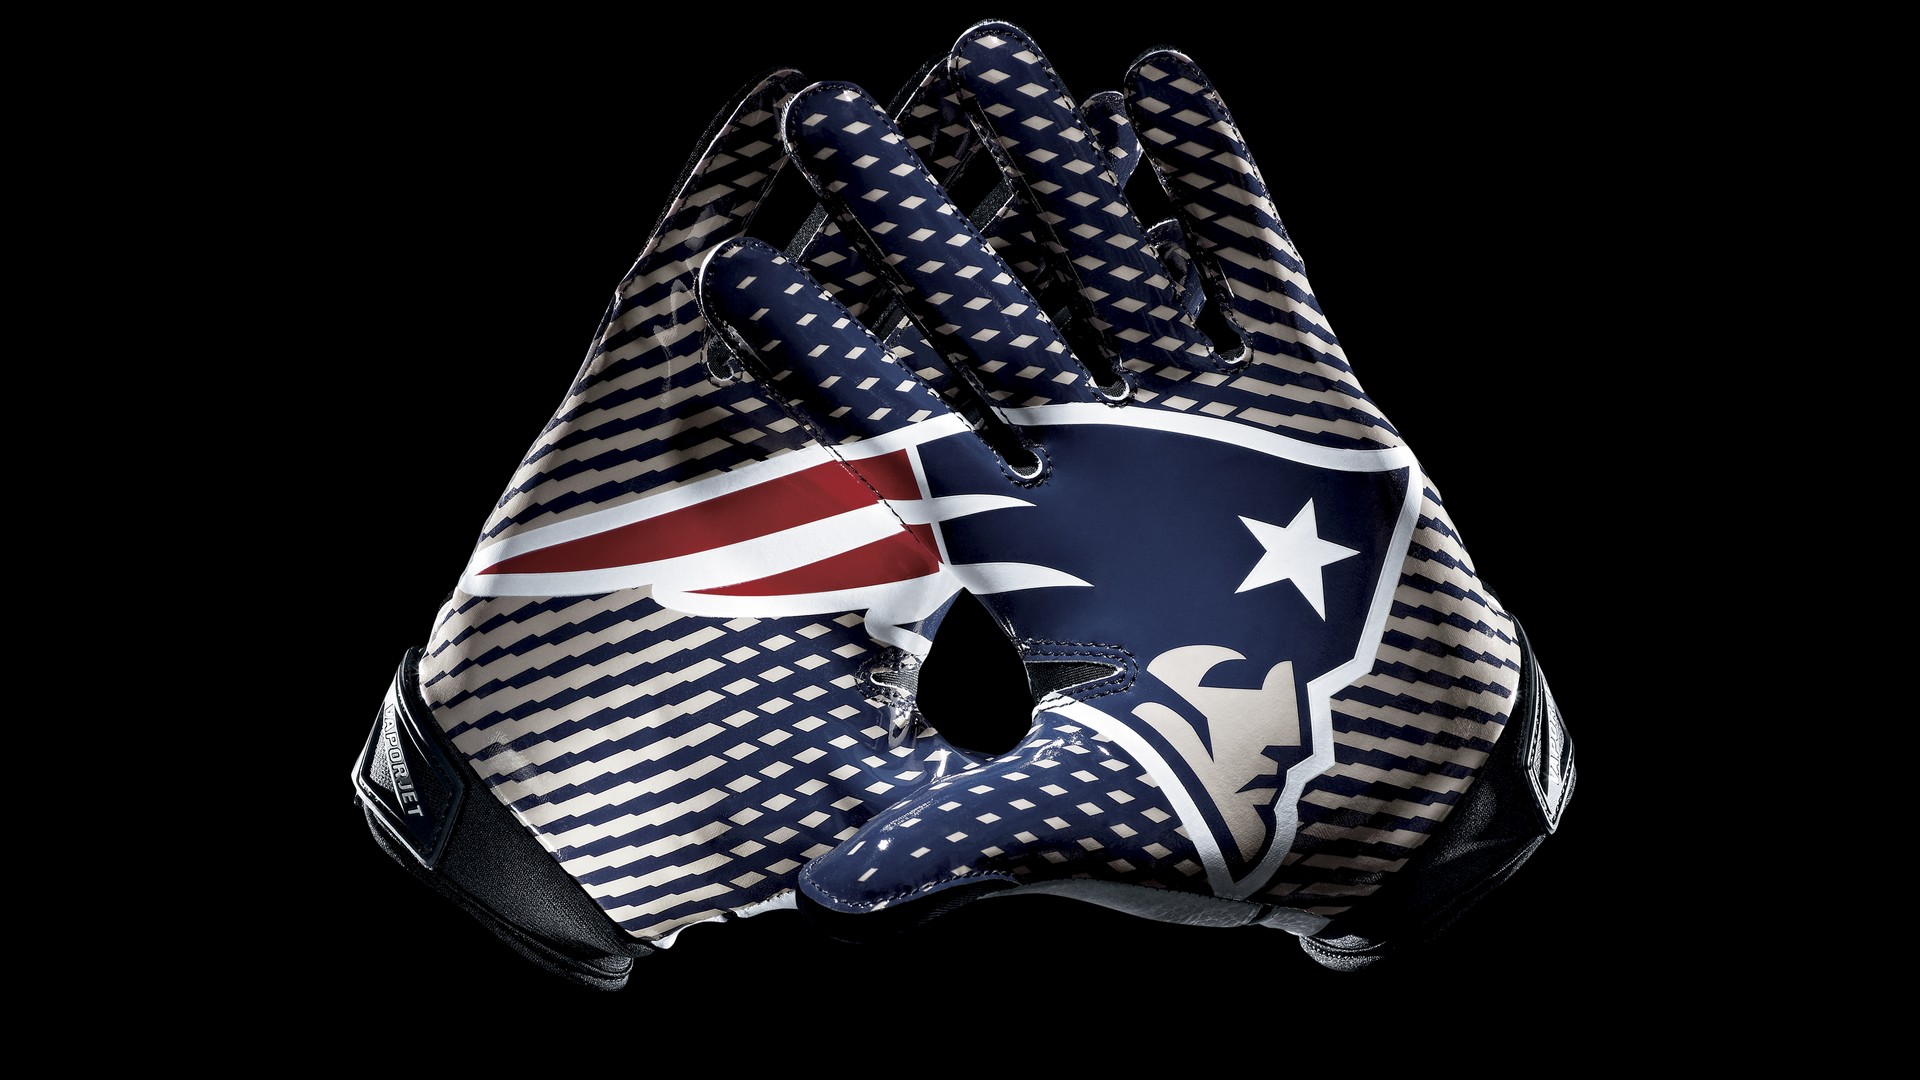 Patriots Desktop Wallpaper With Resolution 1920X1080 pixel. You can make this wallpaper for your Mac or Windows Desktop Background, iPhone, Android or Tablet and another Smartphone device for free